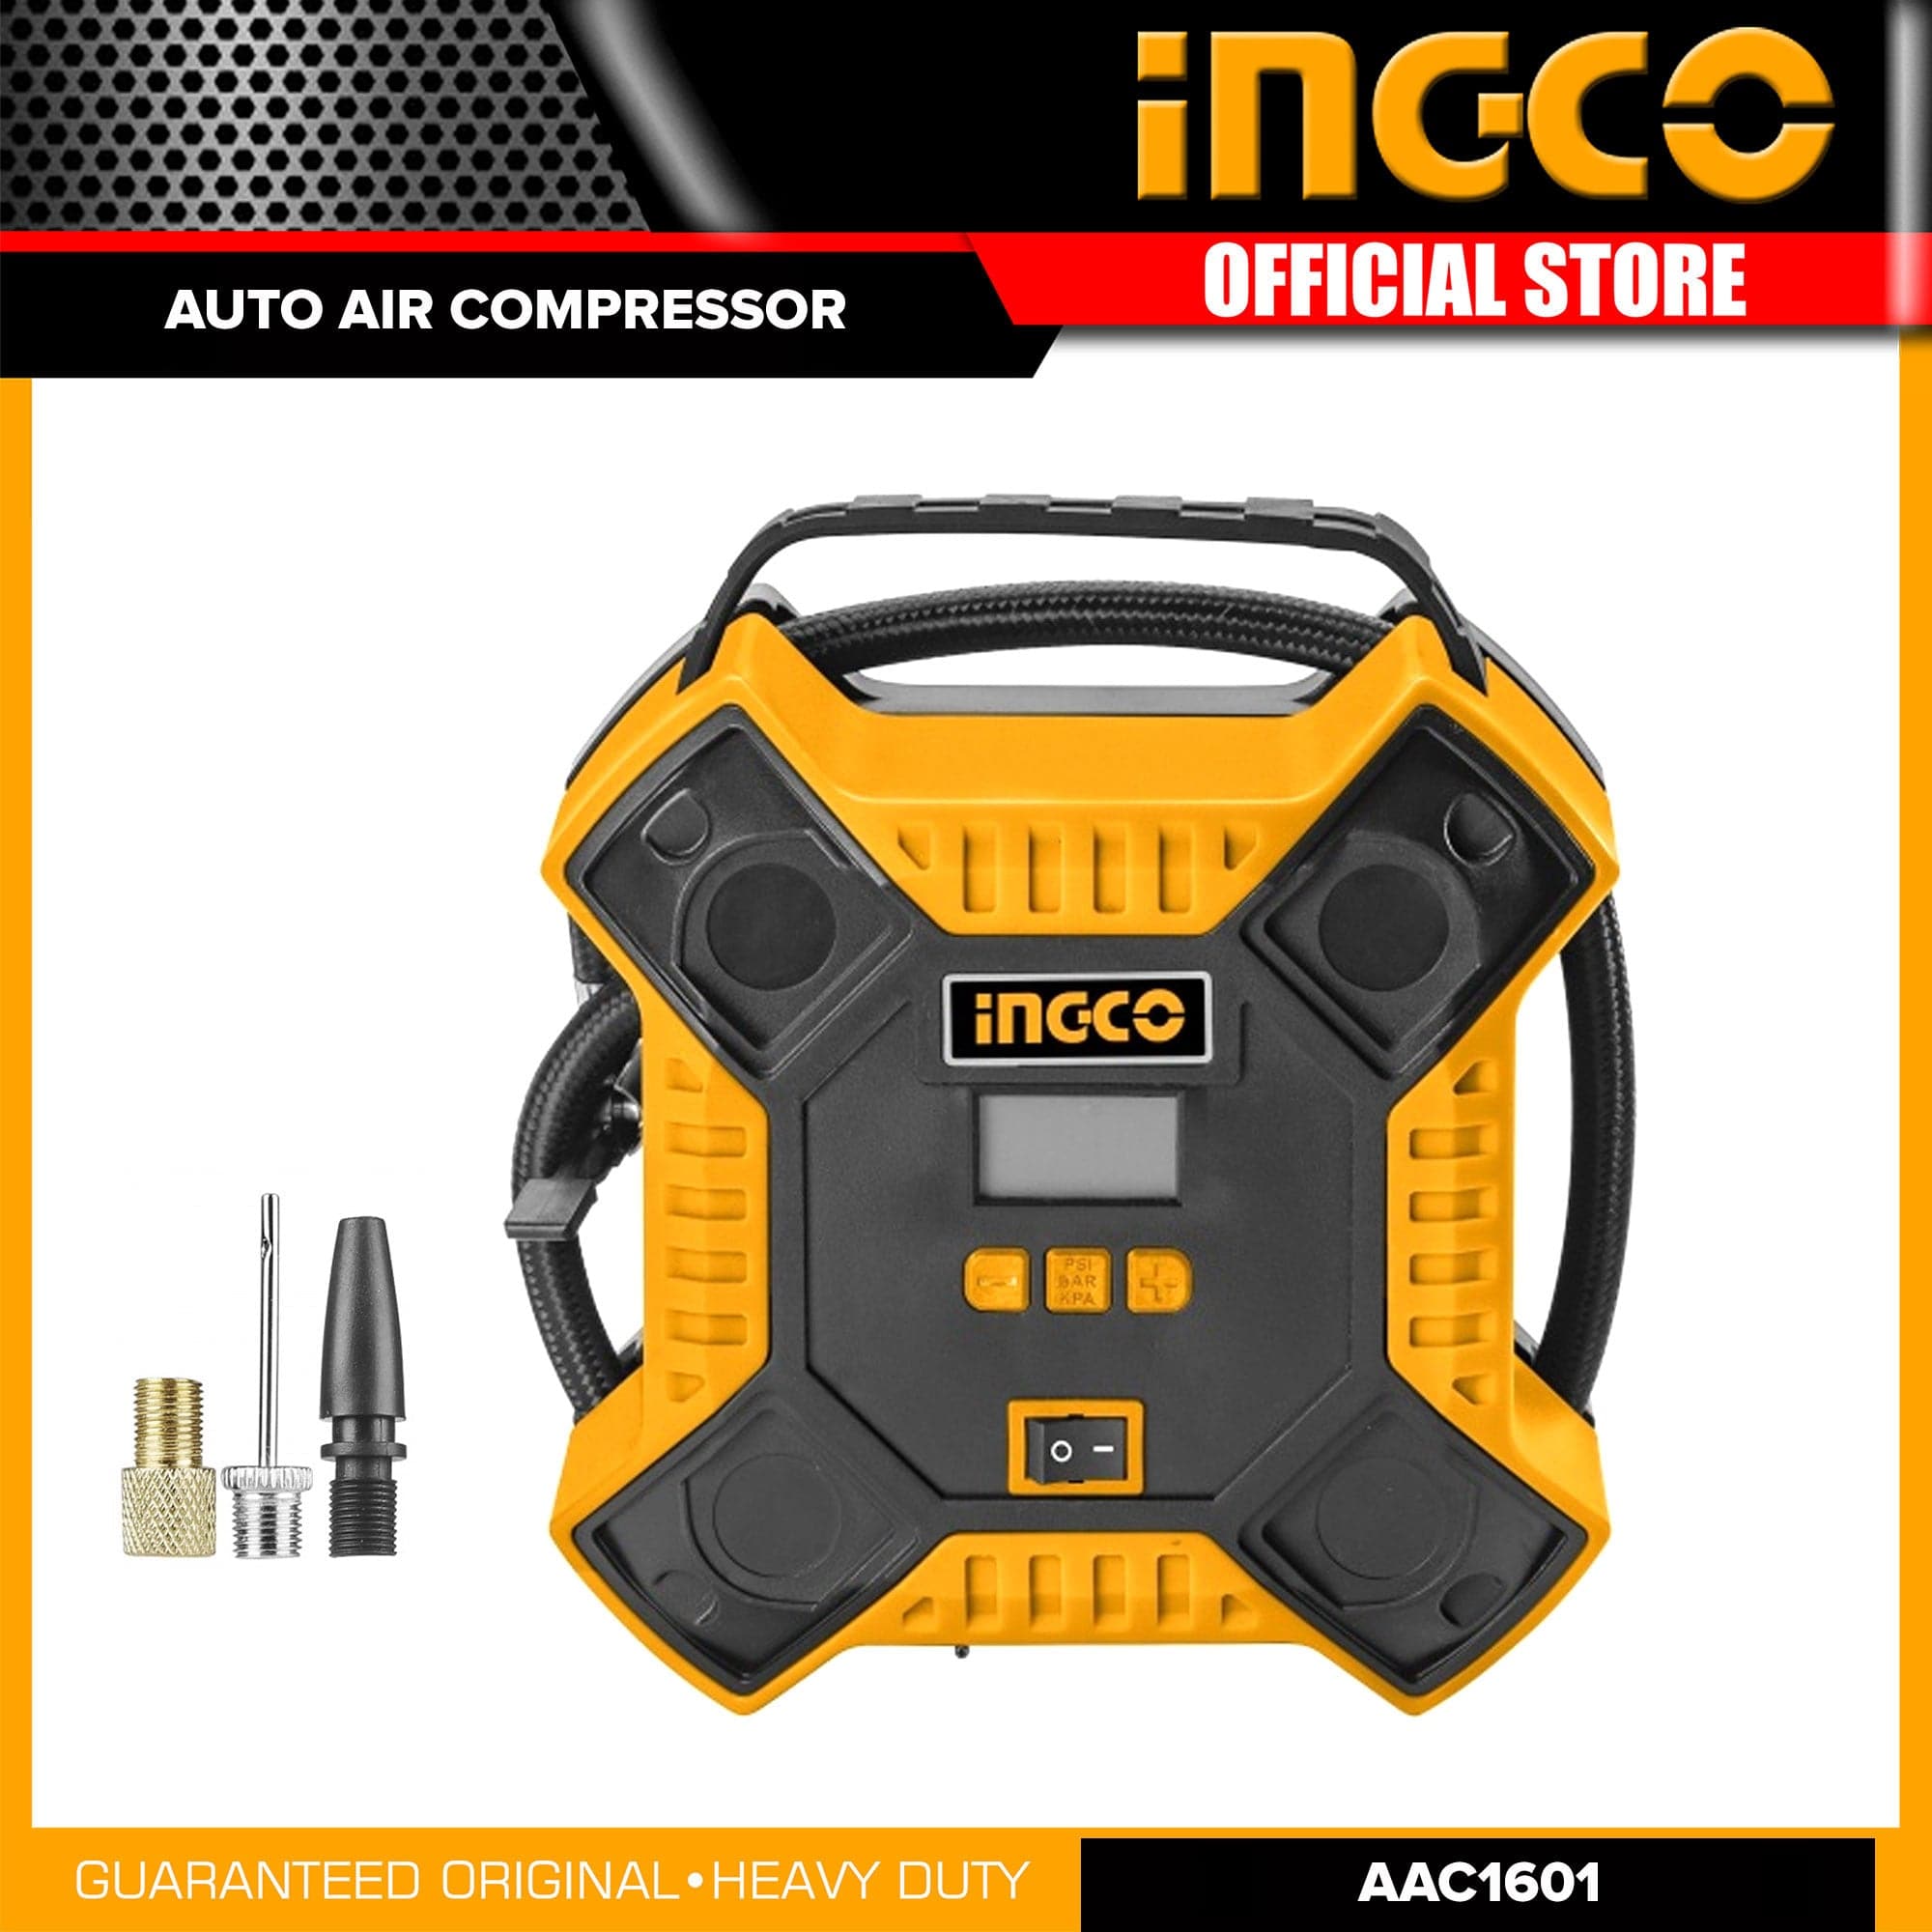 Ingco Auto Air Compressor 12V - AAC1601 | Supply Master | Accra, Ghana Compressor & Air Tool Accessories Buy Tools hardware Building materials